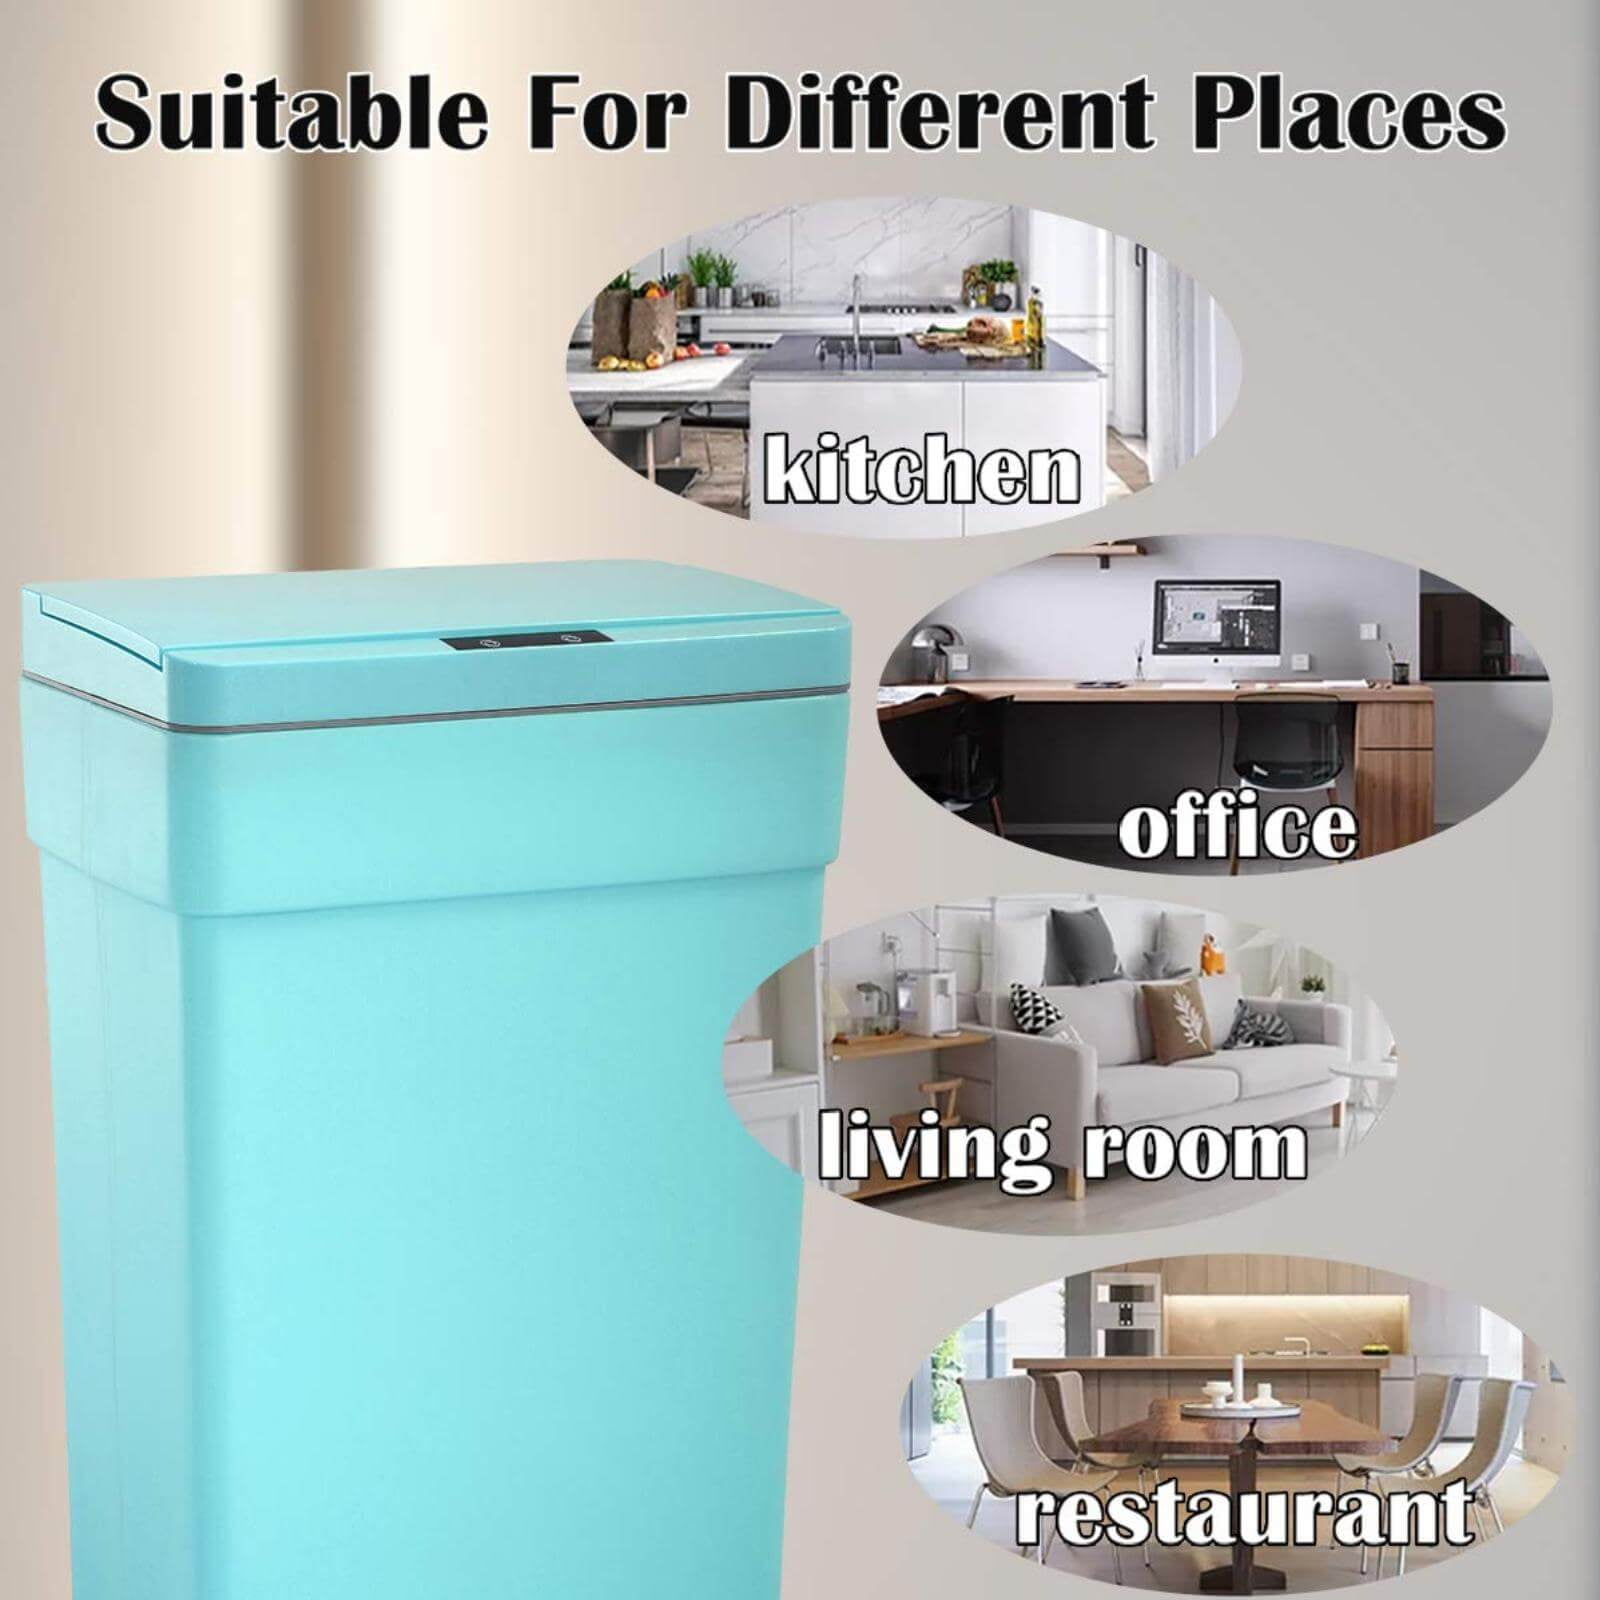 Touchless Trash Can Automatic Touch Free Kitchen Trash Can 13 Gallons –  Modern Kitchen Maker